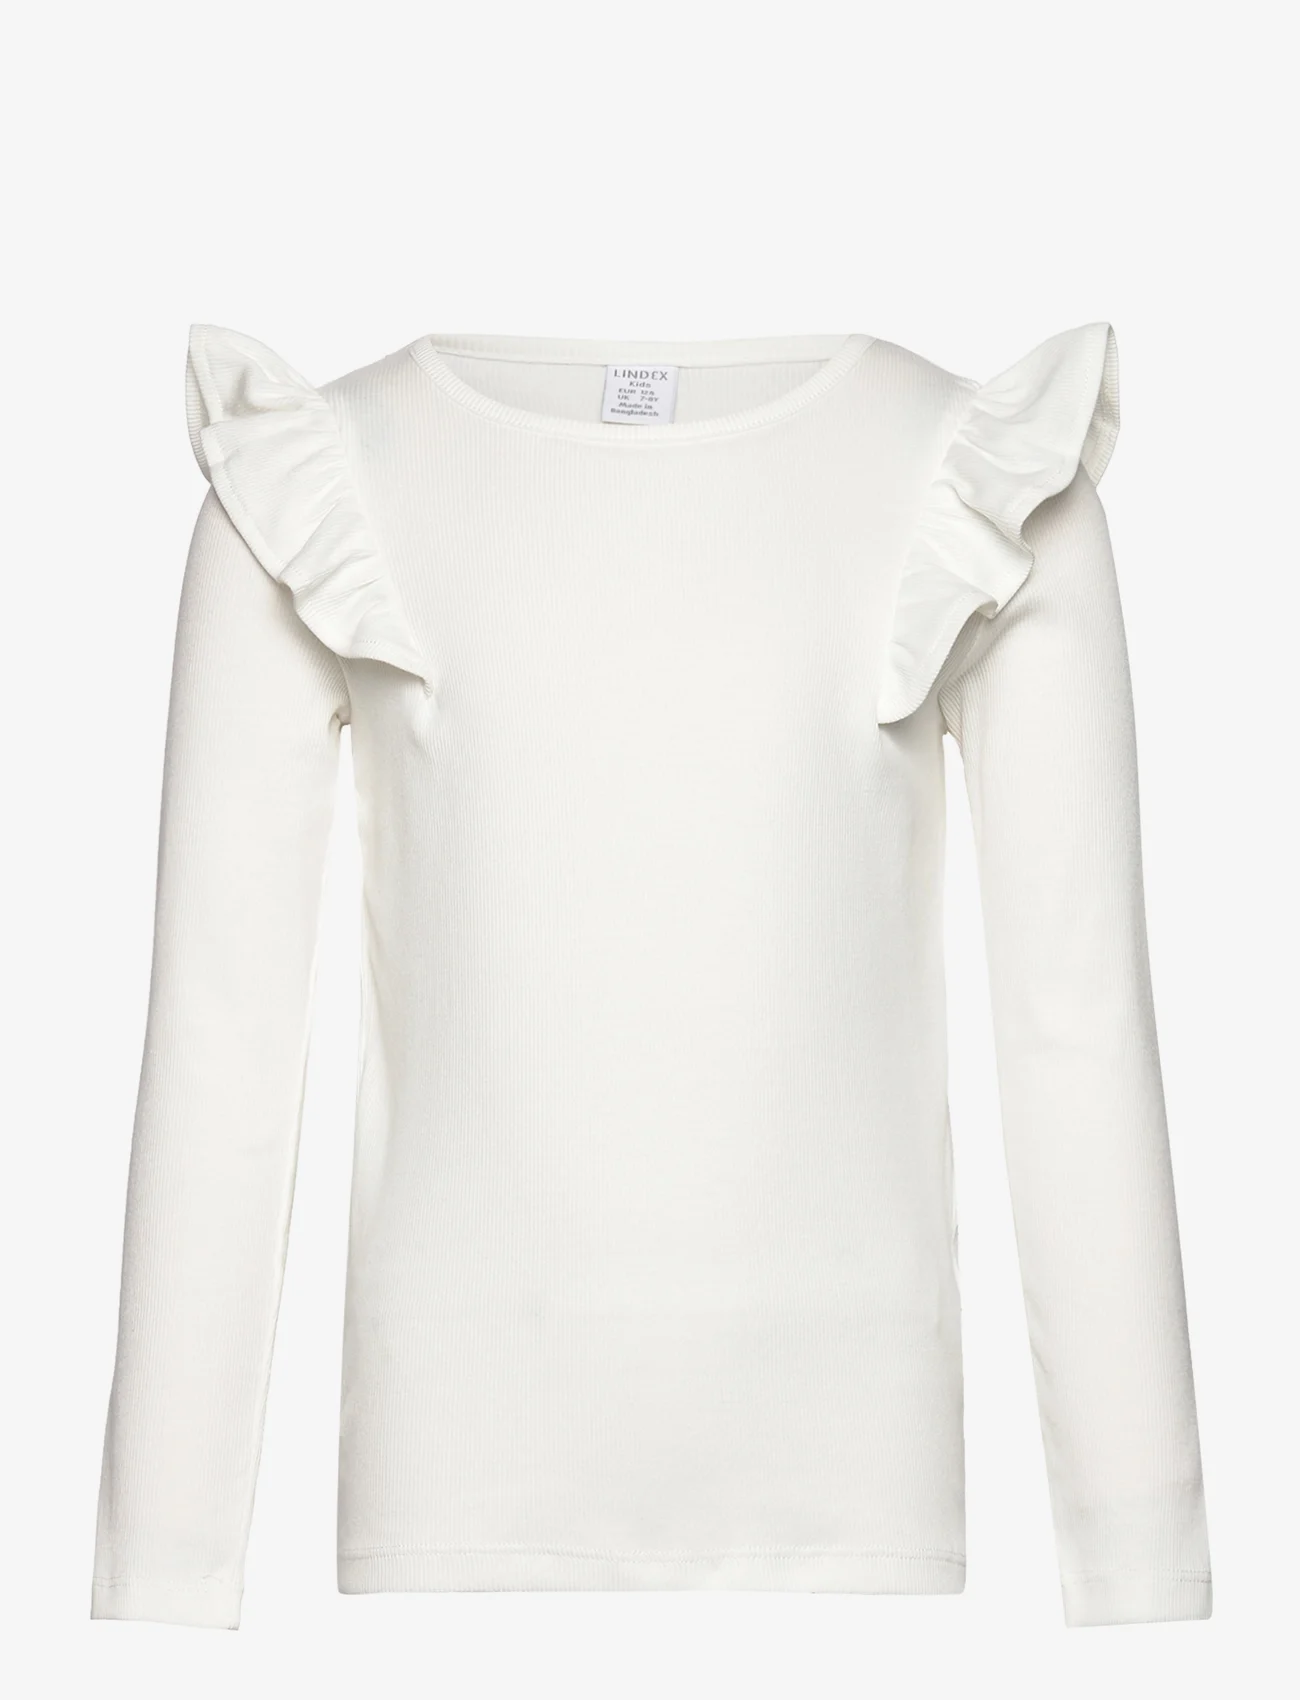 Lindex - Top frill detail solid - pitkähihaiset t-paidat - light dusty white - 0